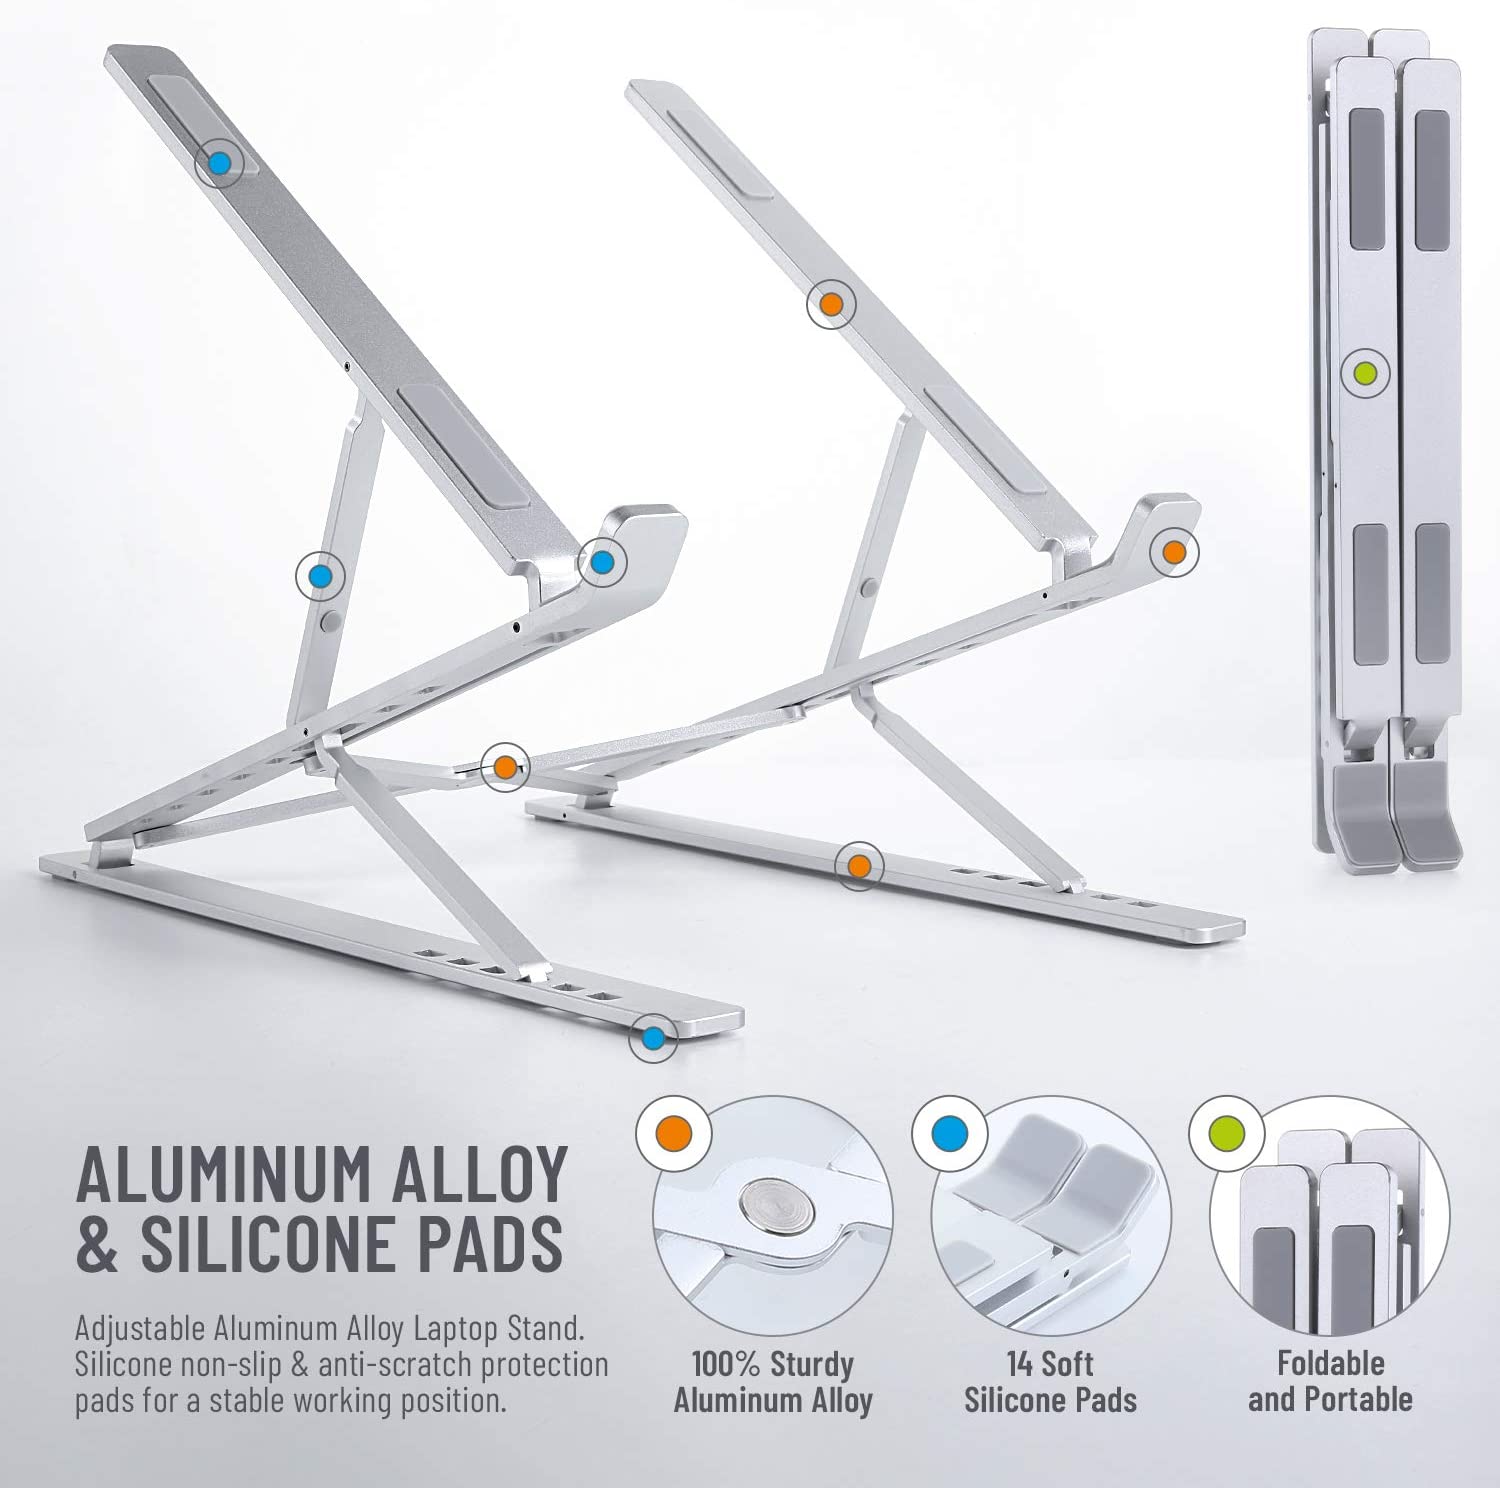 Laptop-Accessories-Portable-Laptop-Stand-Double-Layer-6-9-Levels-Adjustable-Ergonomic-Portable-Aluminum-Lightweight-Folding-Laptop-Stand-for-any-device-11